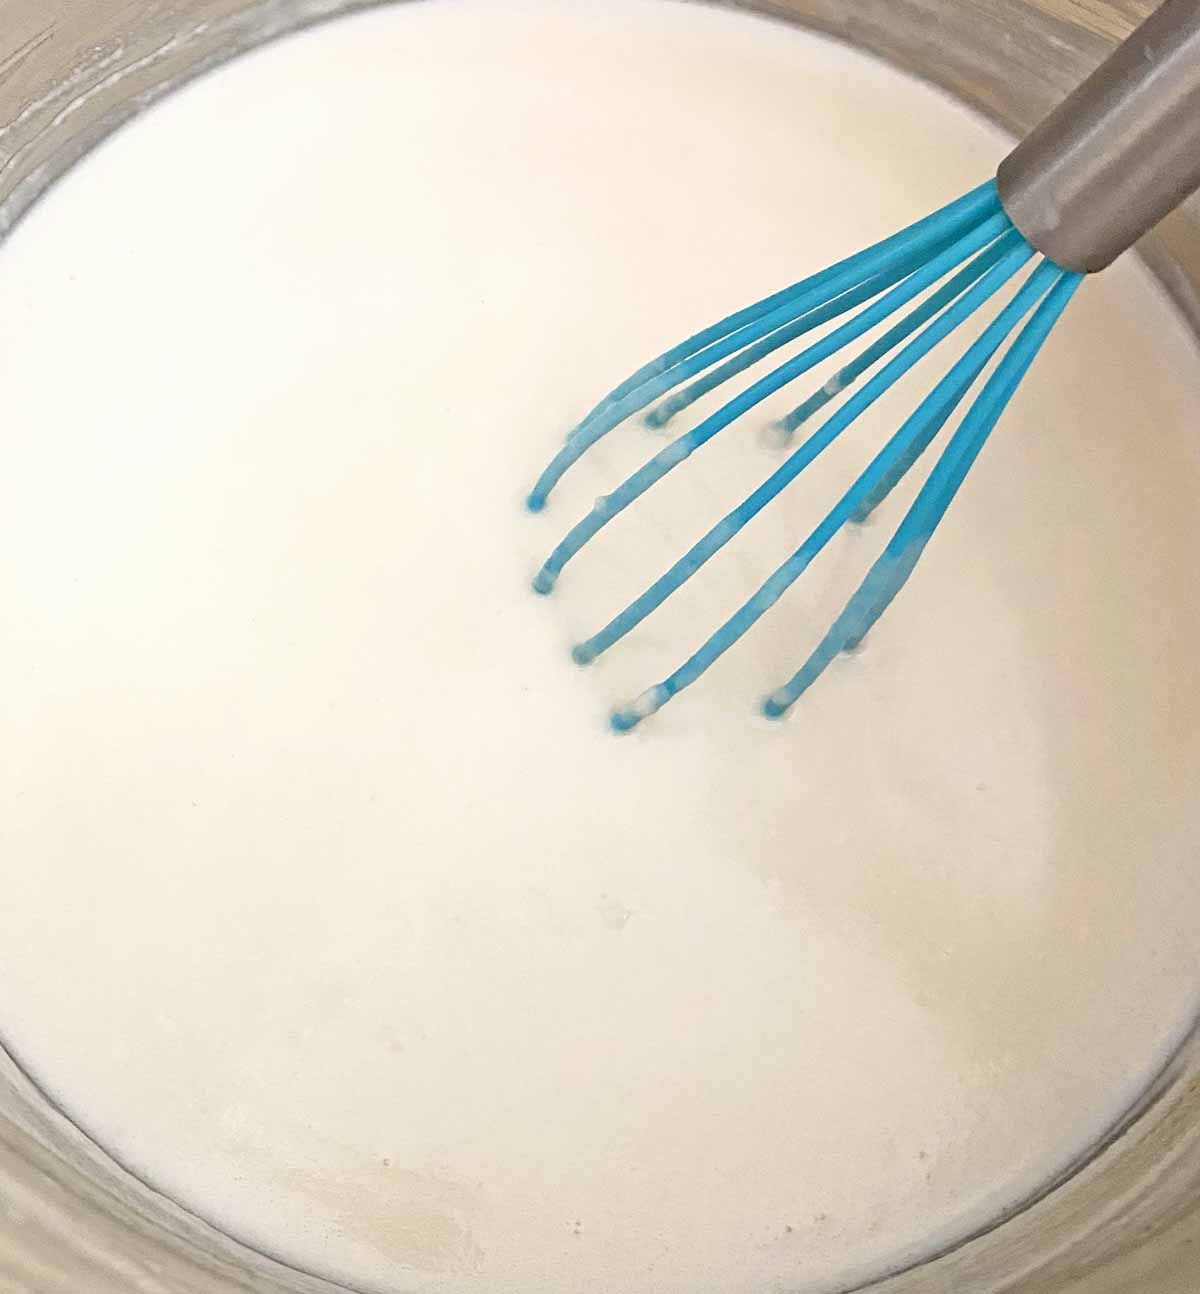 Whisking the cream soup mixture with a blue silicone whisk.